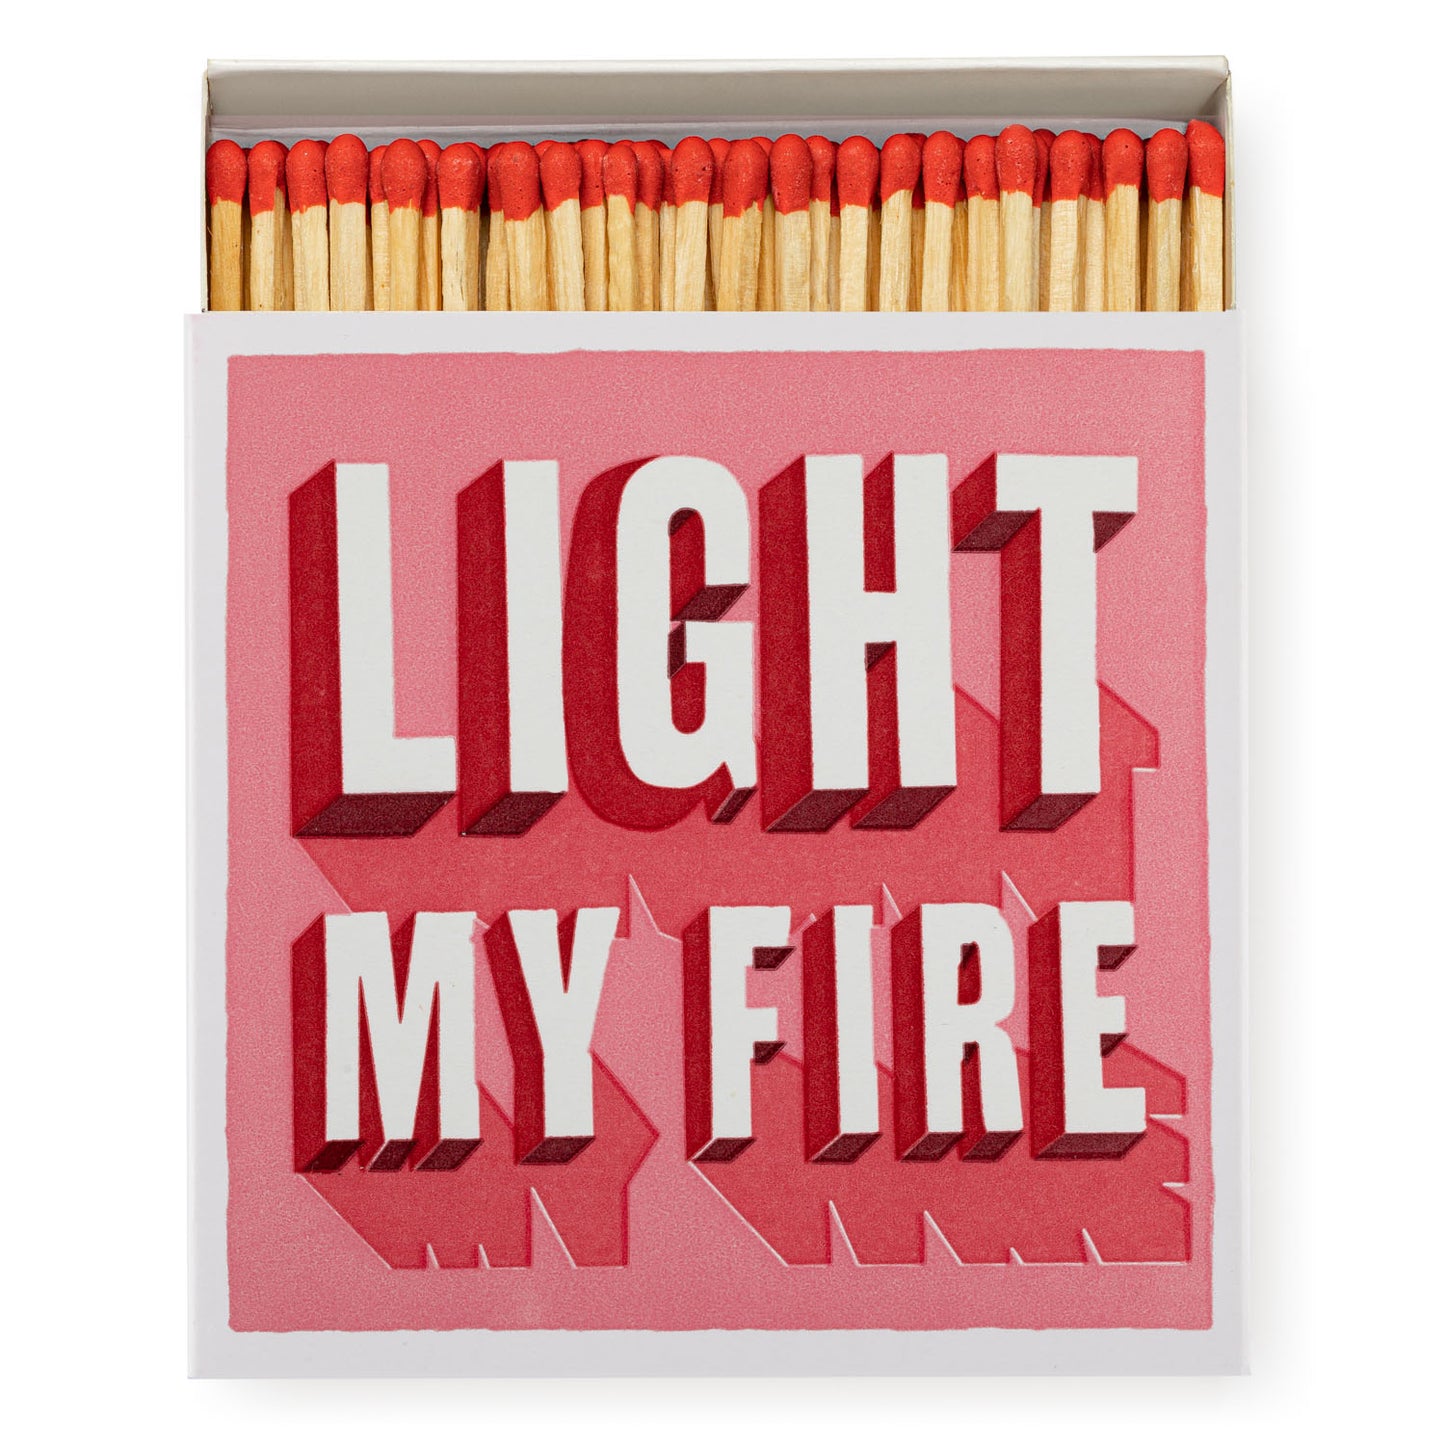 Worded matches bundle